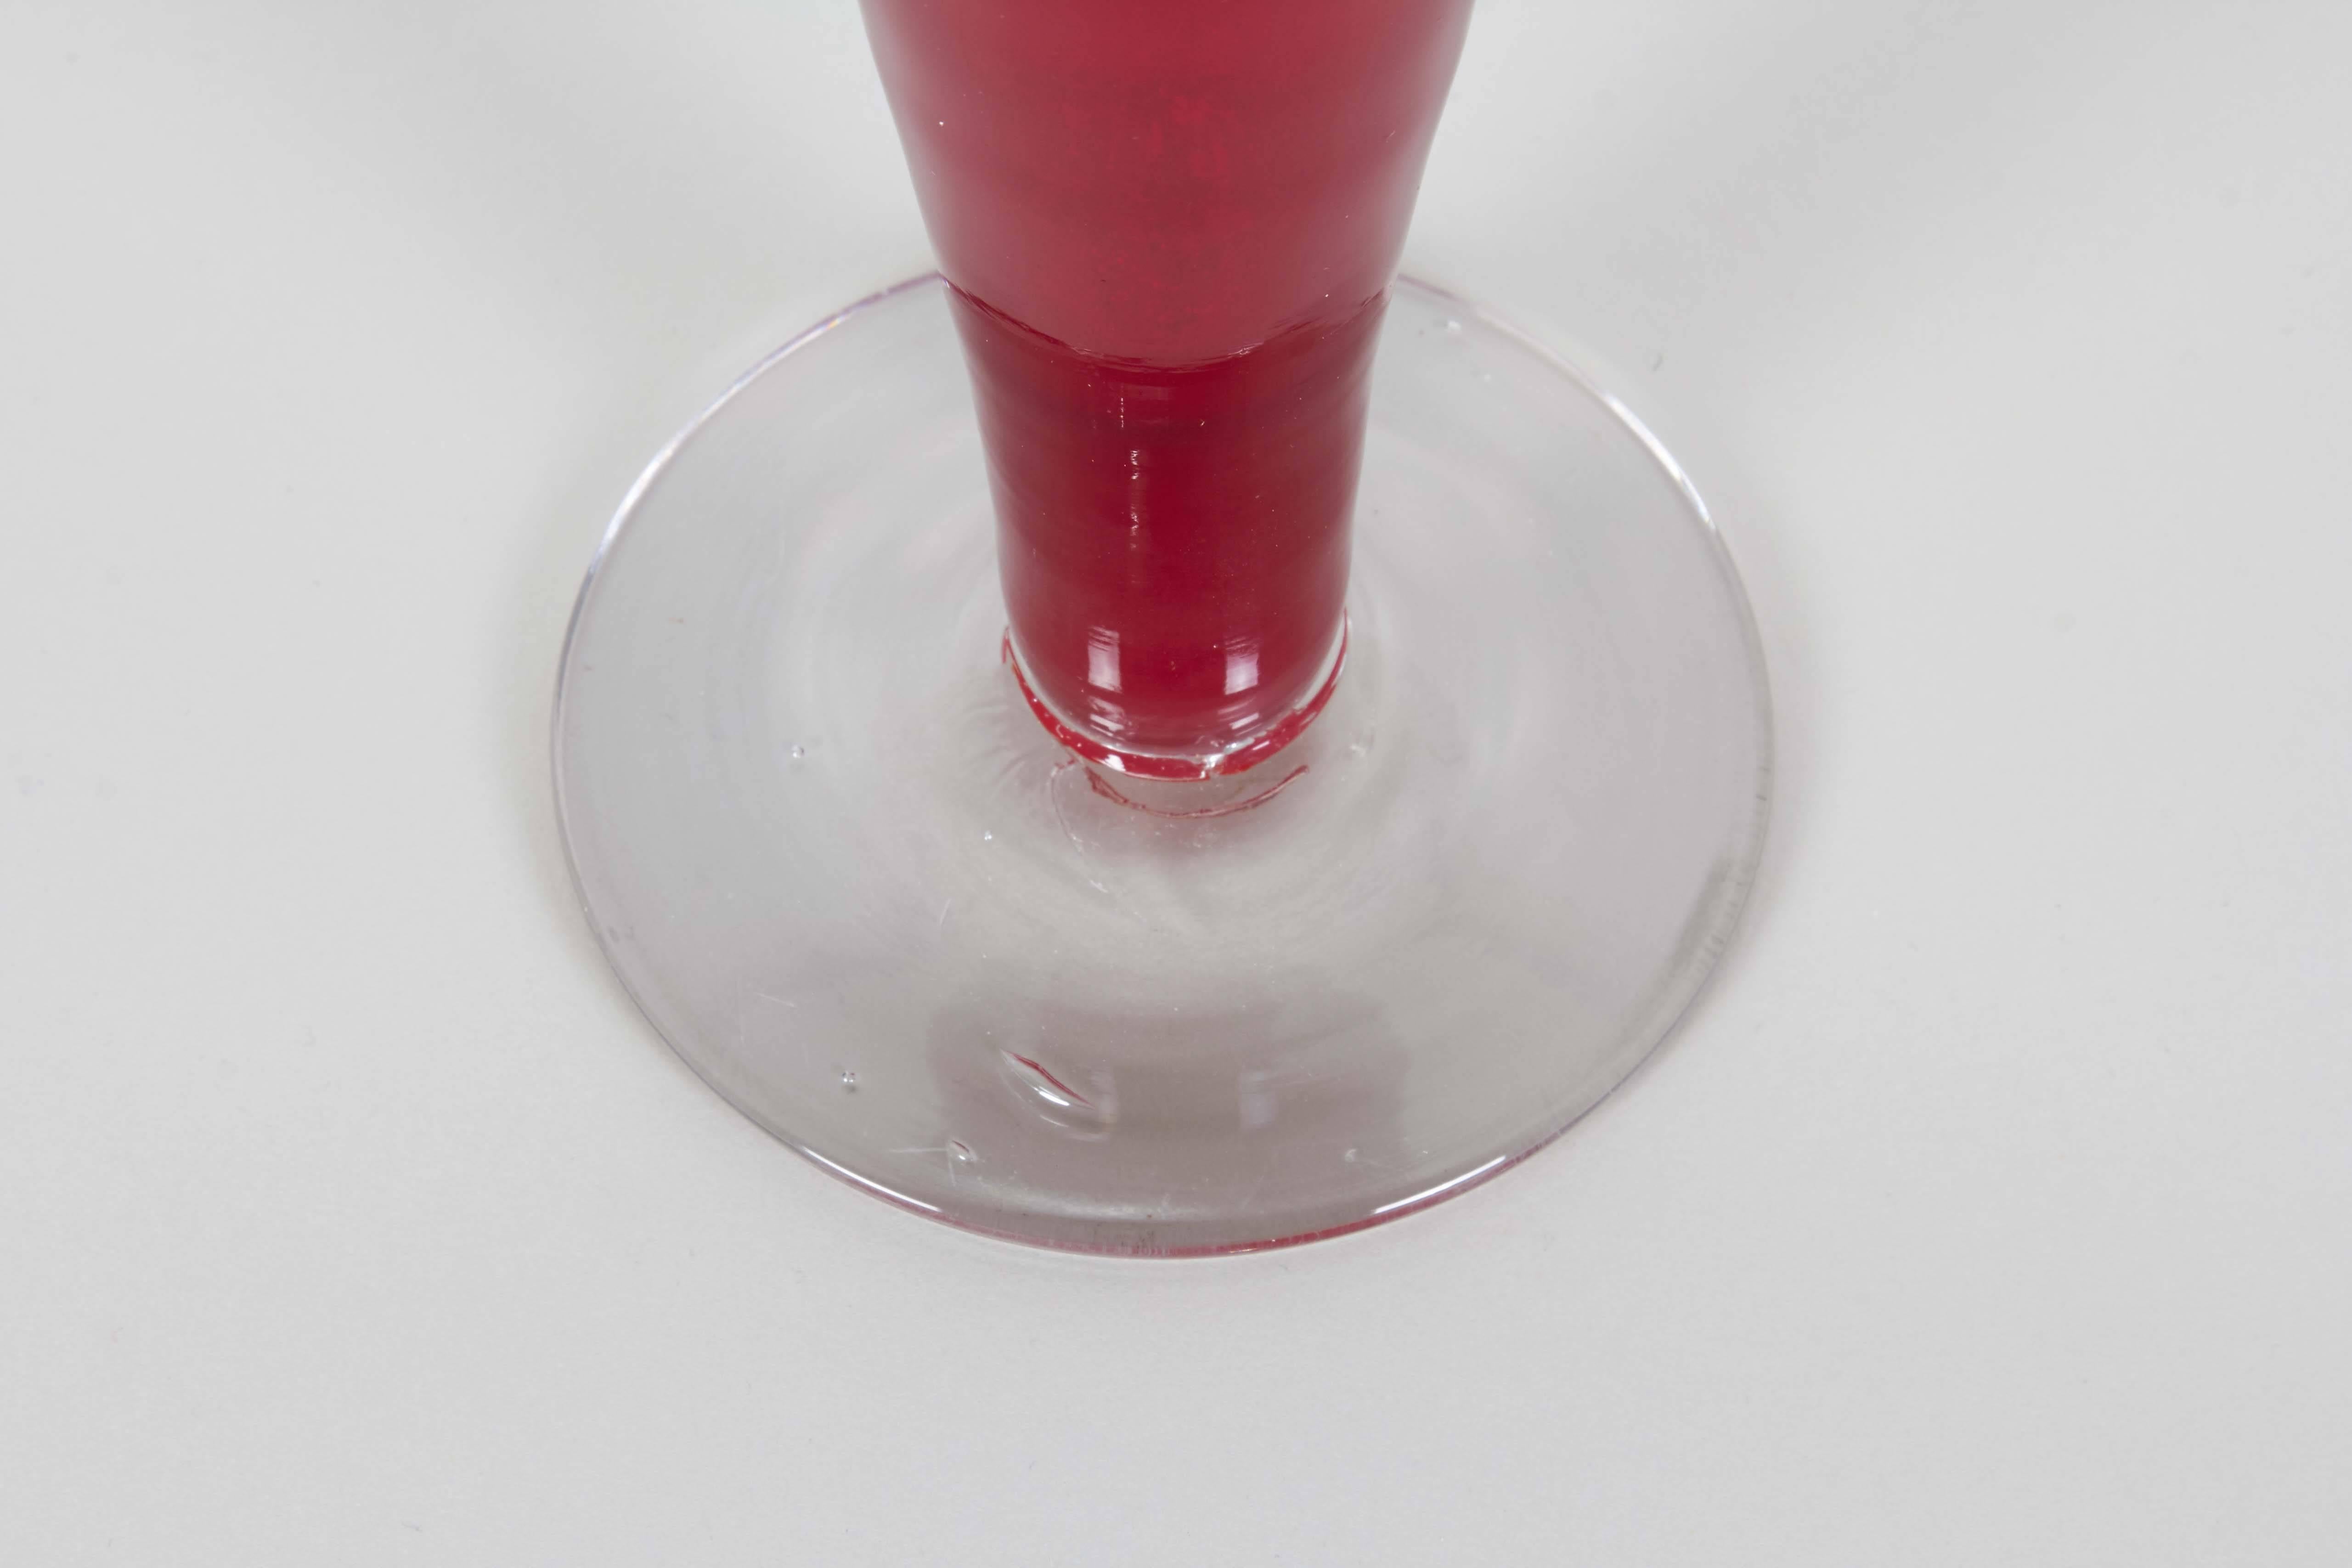 A decanter from the 'Regal' series by Blenko, production of which lasted from 1959-1962, comprised of bright red blown glass, pointed finial stopper with tapered body on clear circular base. Markings include [Blenko] acid etched to the underside of